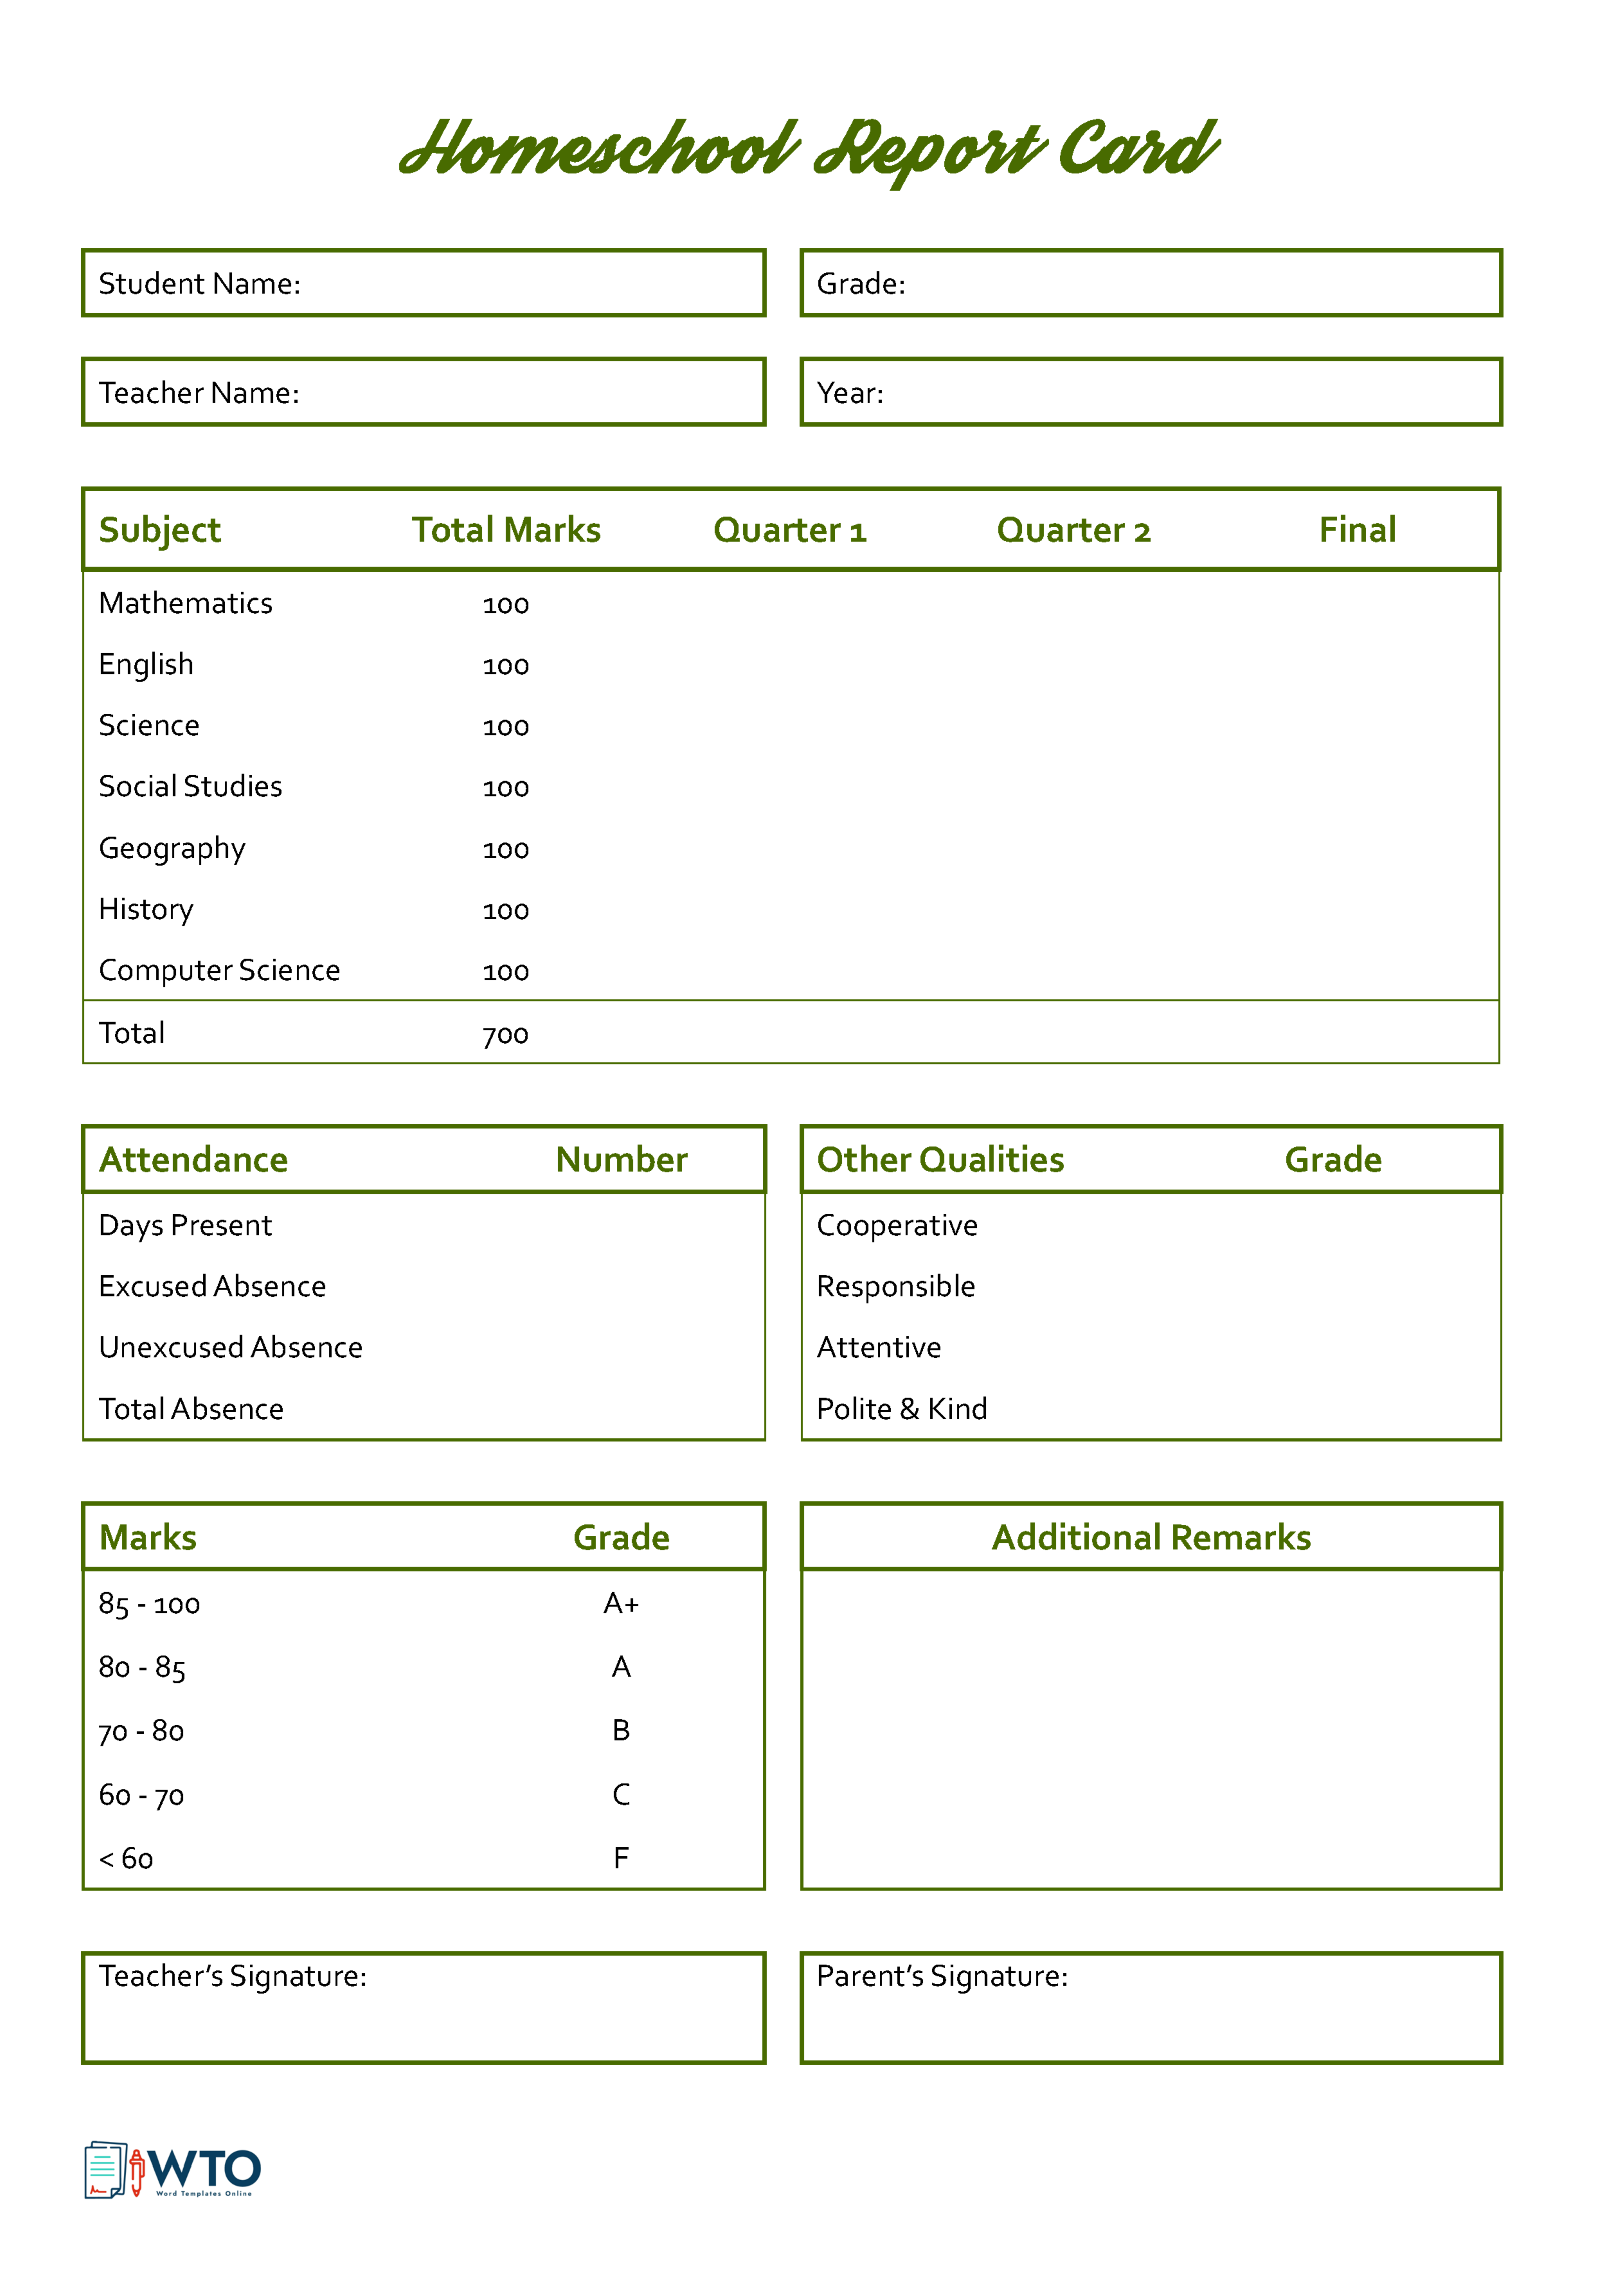 Free Homeschool Report Card Format and Sample